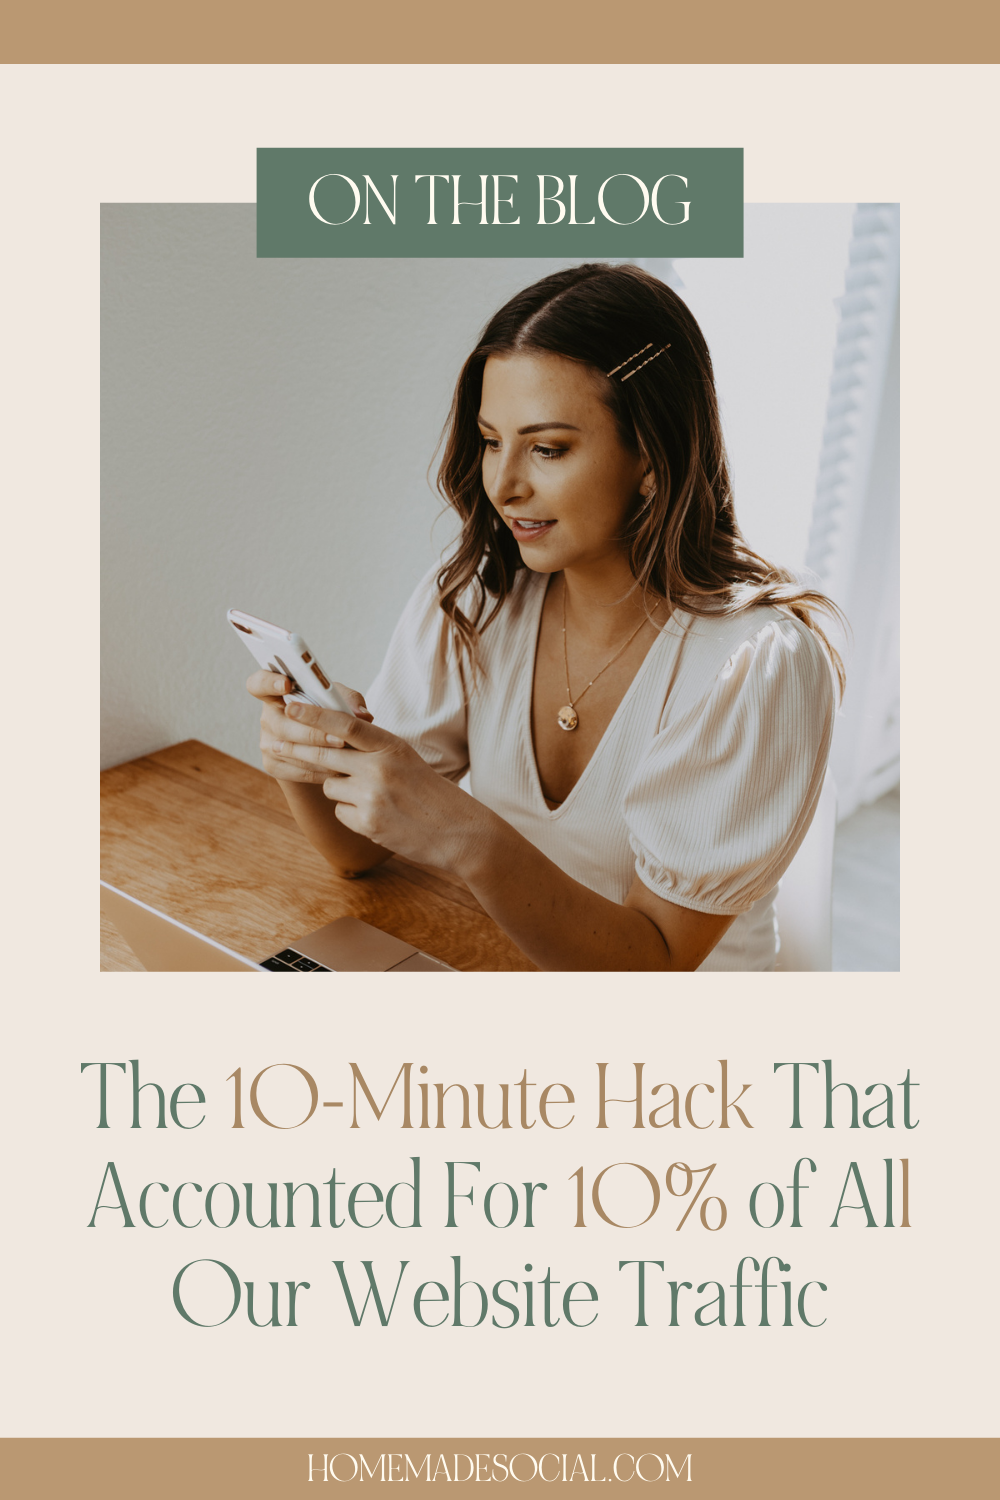 https://www.homemadesocial.com/blog/10-minute-hack-that-accounted-for-10-percent-of-website-traffic?rq=10%25